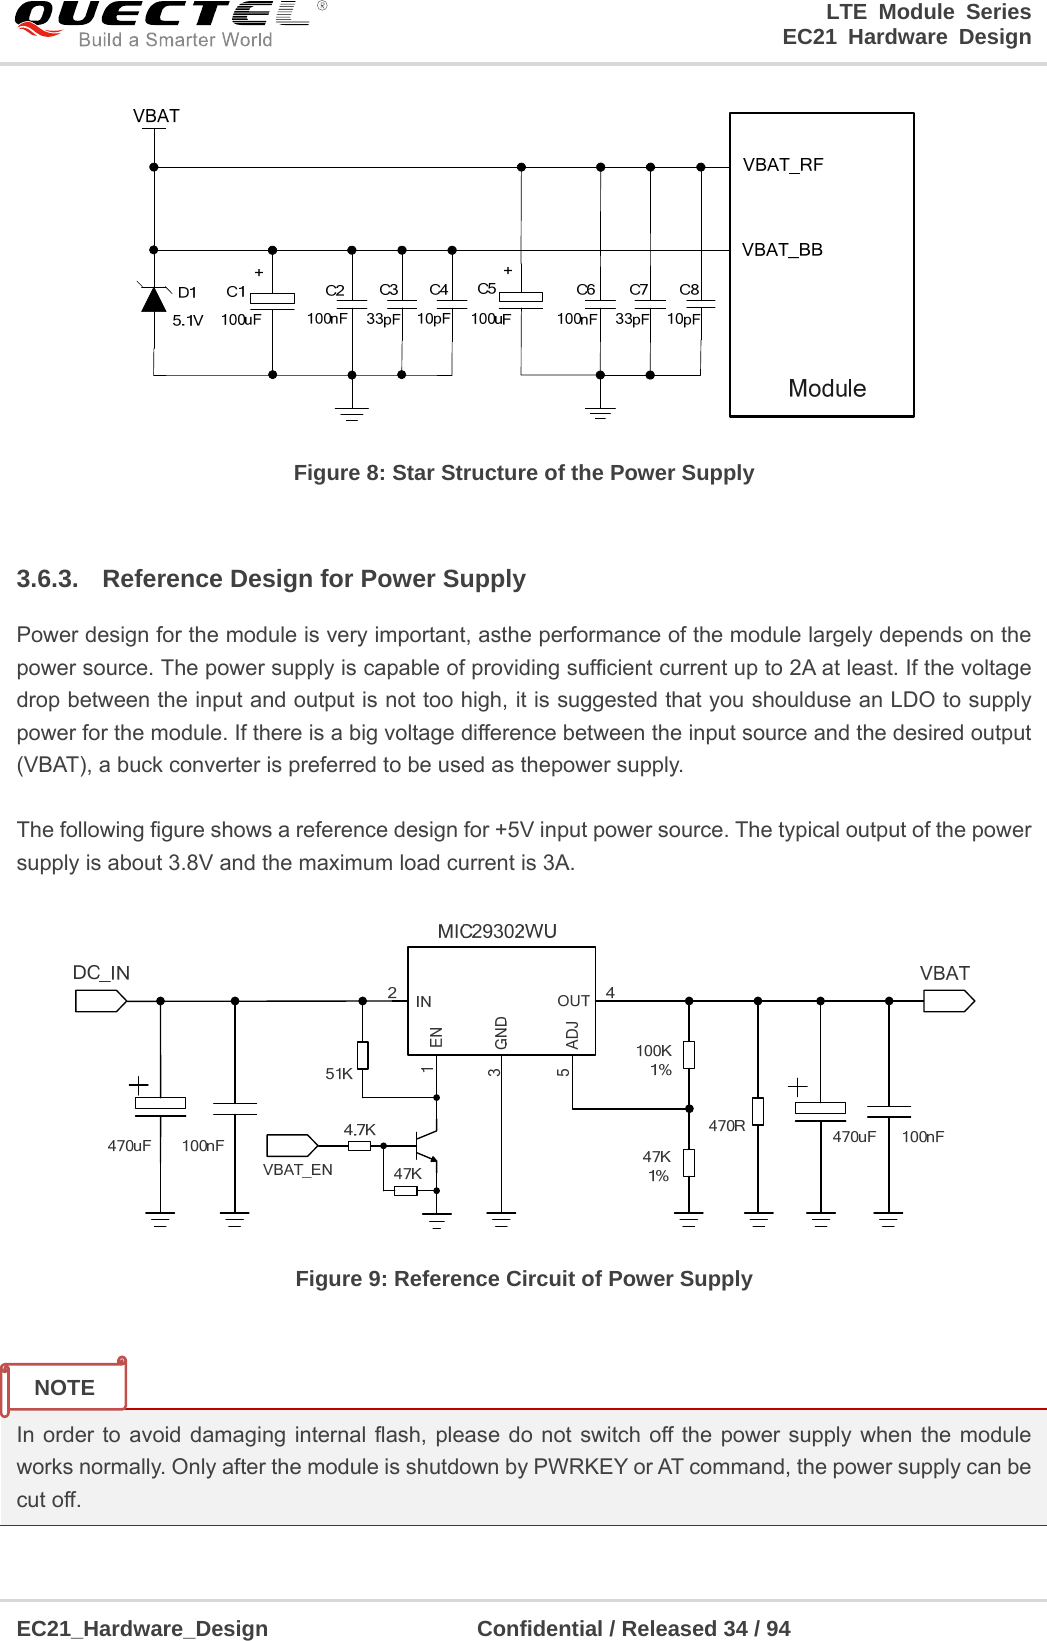 LTE Module Series                                                                 EC21 Hardware Design  EC21_Hardware_Design                   Confidential / Released 34 / 94     Figure 8: Star Structure of the Power Supply  3.6.3.  Reference Design for Power Supply Power design for the module is very important, asthe performance of the module largely depends on the power source. The power supply is capable of providing sufficient current up to 2A at least. If the voltage drop between the input and output is not too high, it is suggested that you shoulduse an LDO to supply power for the module. If there is a big voltage difference between the input source and the desired output (VBAT), a buck converter is preferred to be used as thepower supply.  The following figure shows a reference design for +5V input power source. The typical output of the power supply is about 3.8V and the maximum load current is 3A.    Figure 9: Reference Circuit of Power Supply   In order to avoid damaging internal flash, please do not switch off the power supply when the module works normally. Only after the module is shutdown by PWRKEY or AT command, the power supply can be cut off.  NOTE 